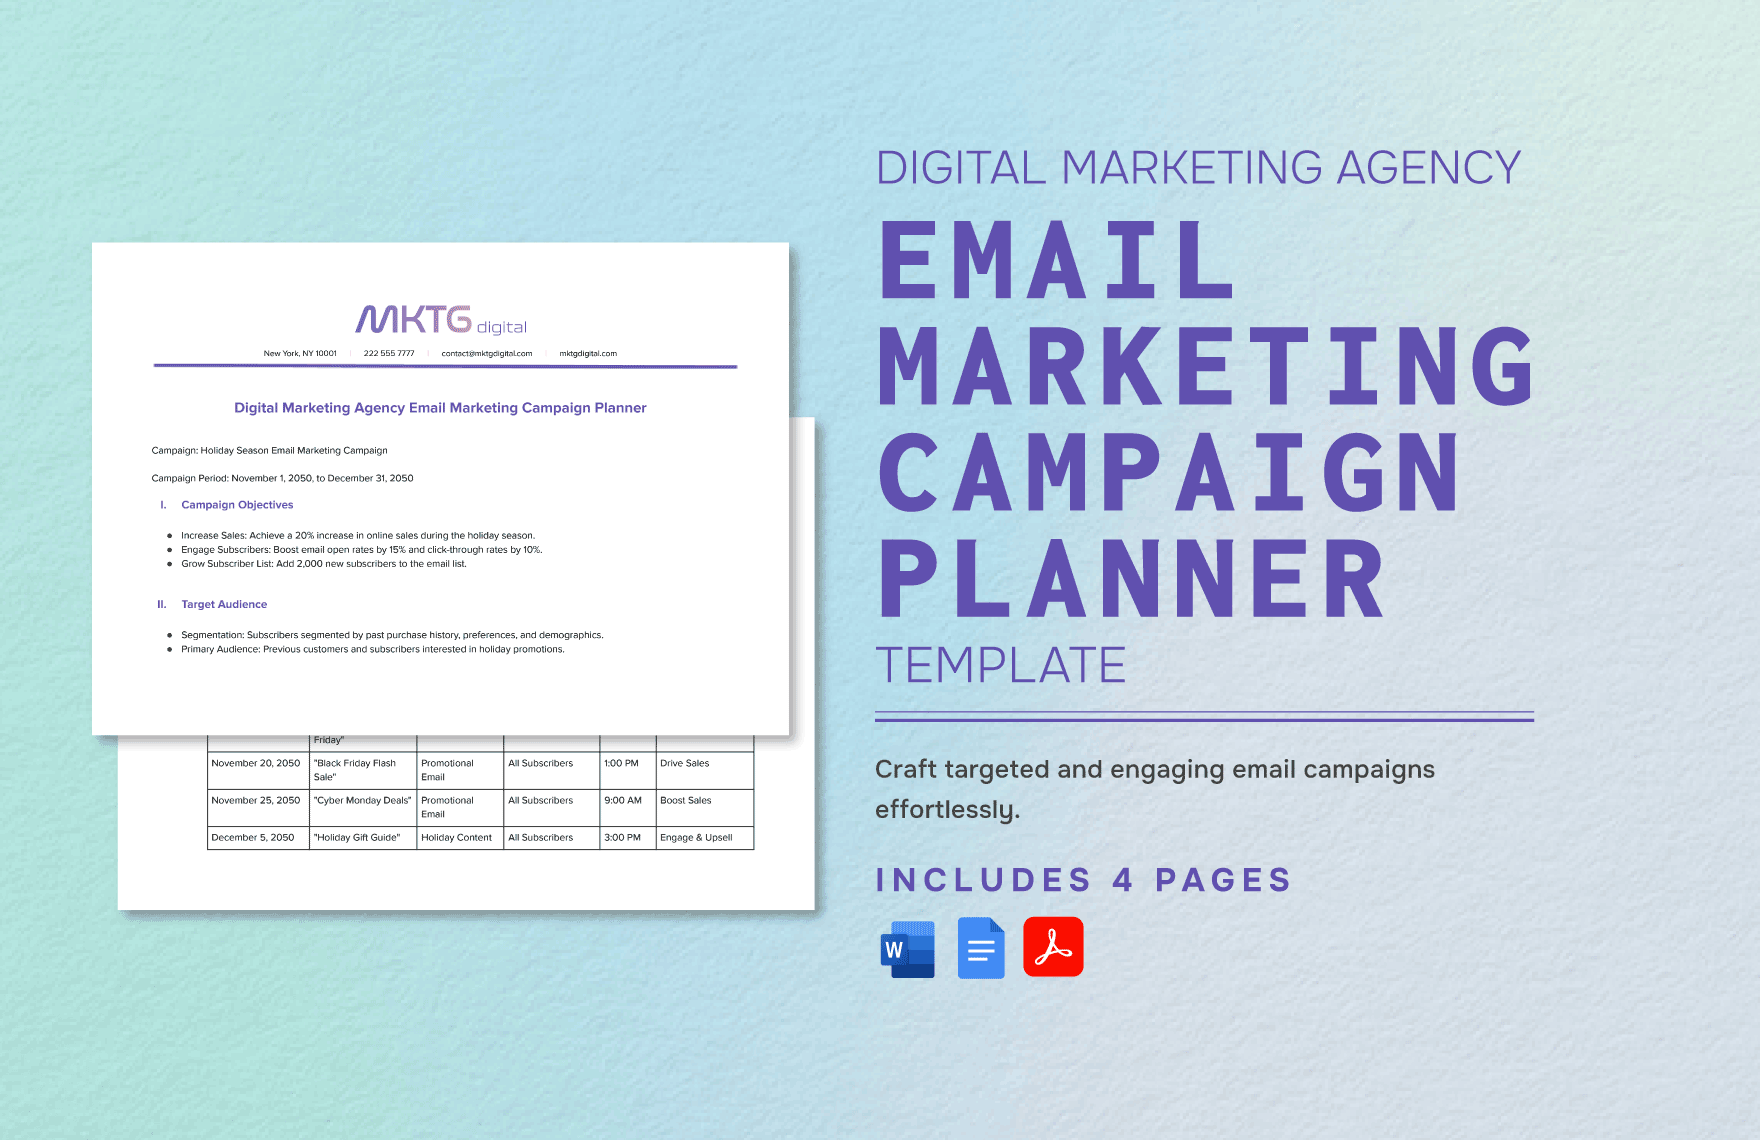 Digital Marketing Agency Email Marketing Campaign Planner Template